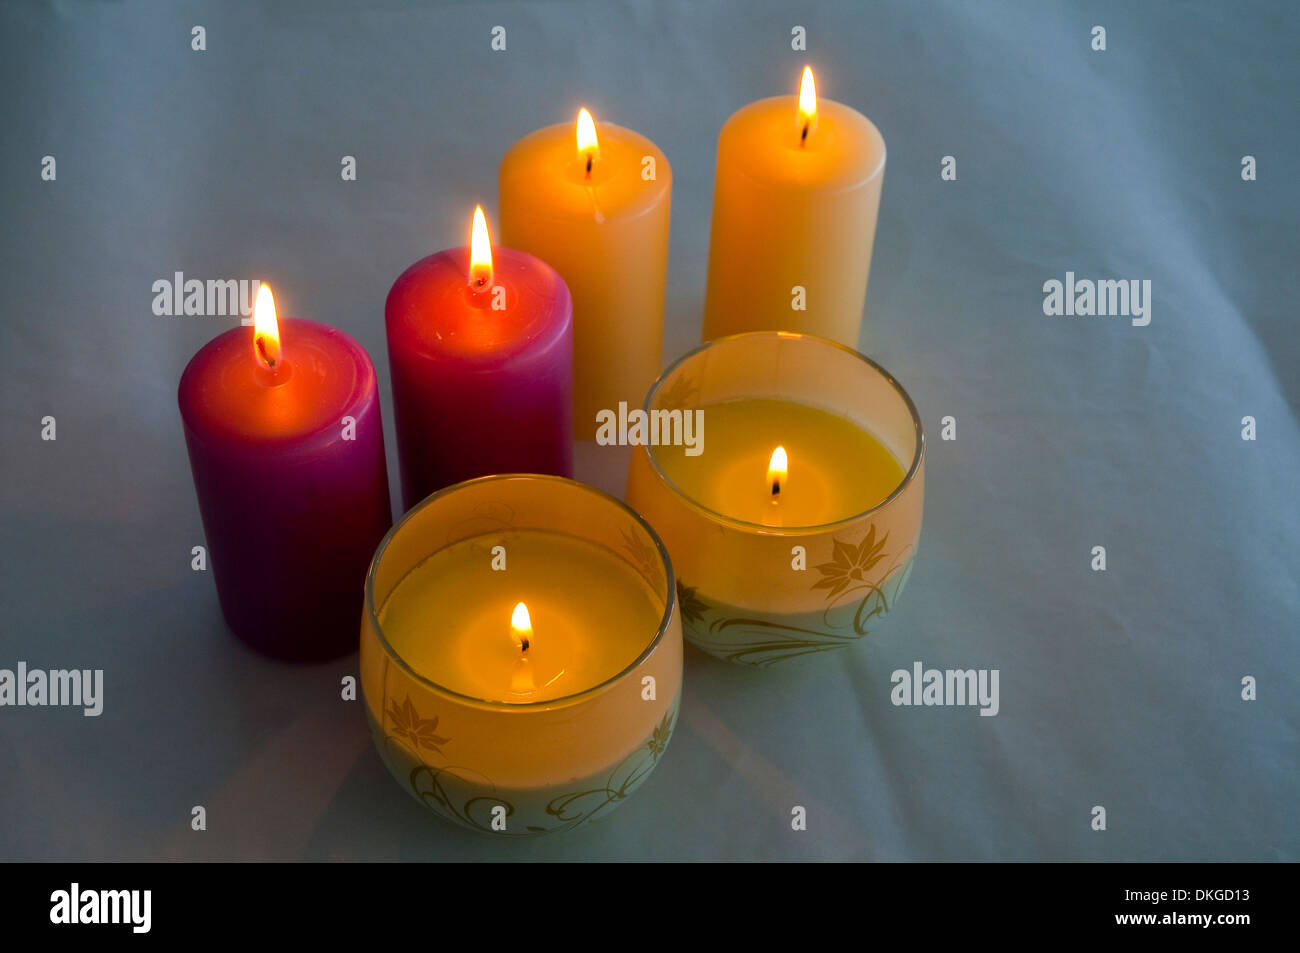 Six lit up candles. Stock Photo